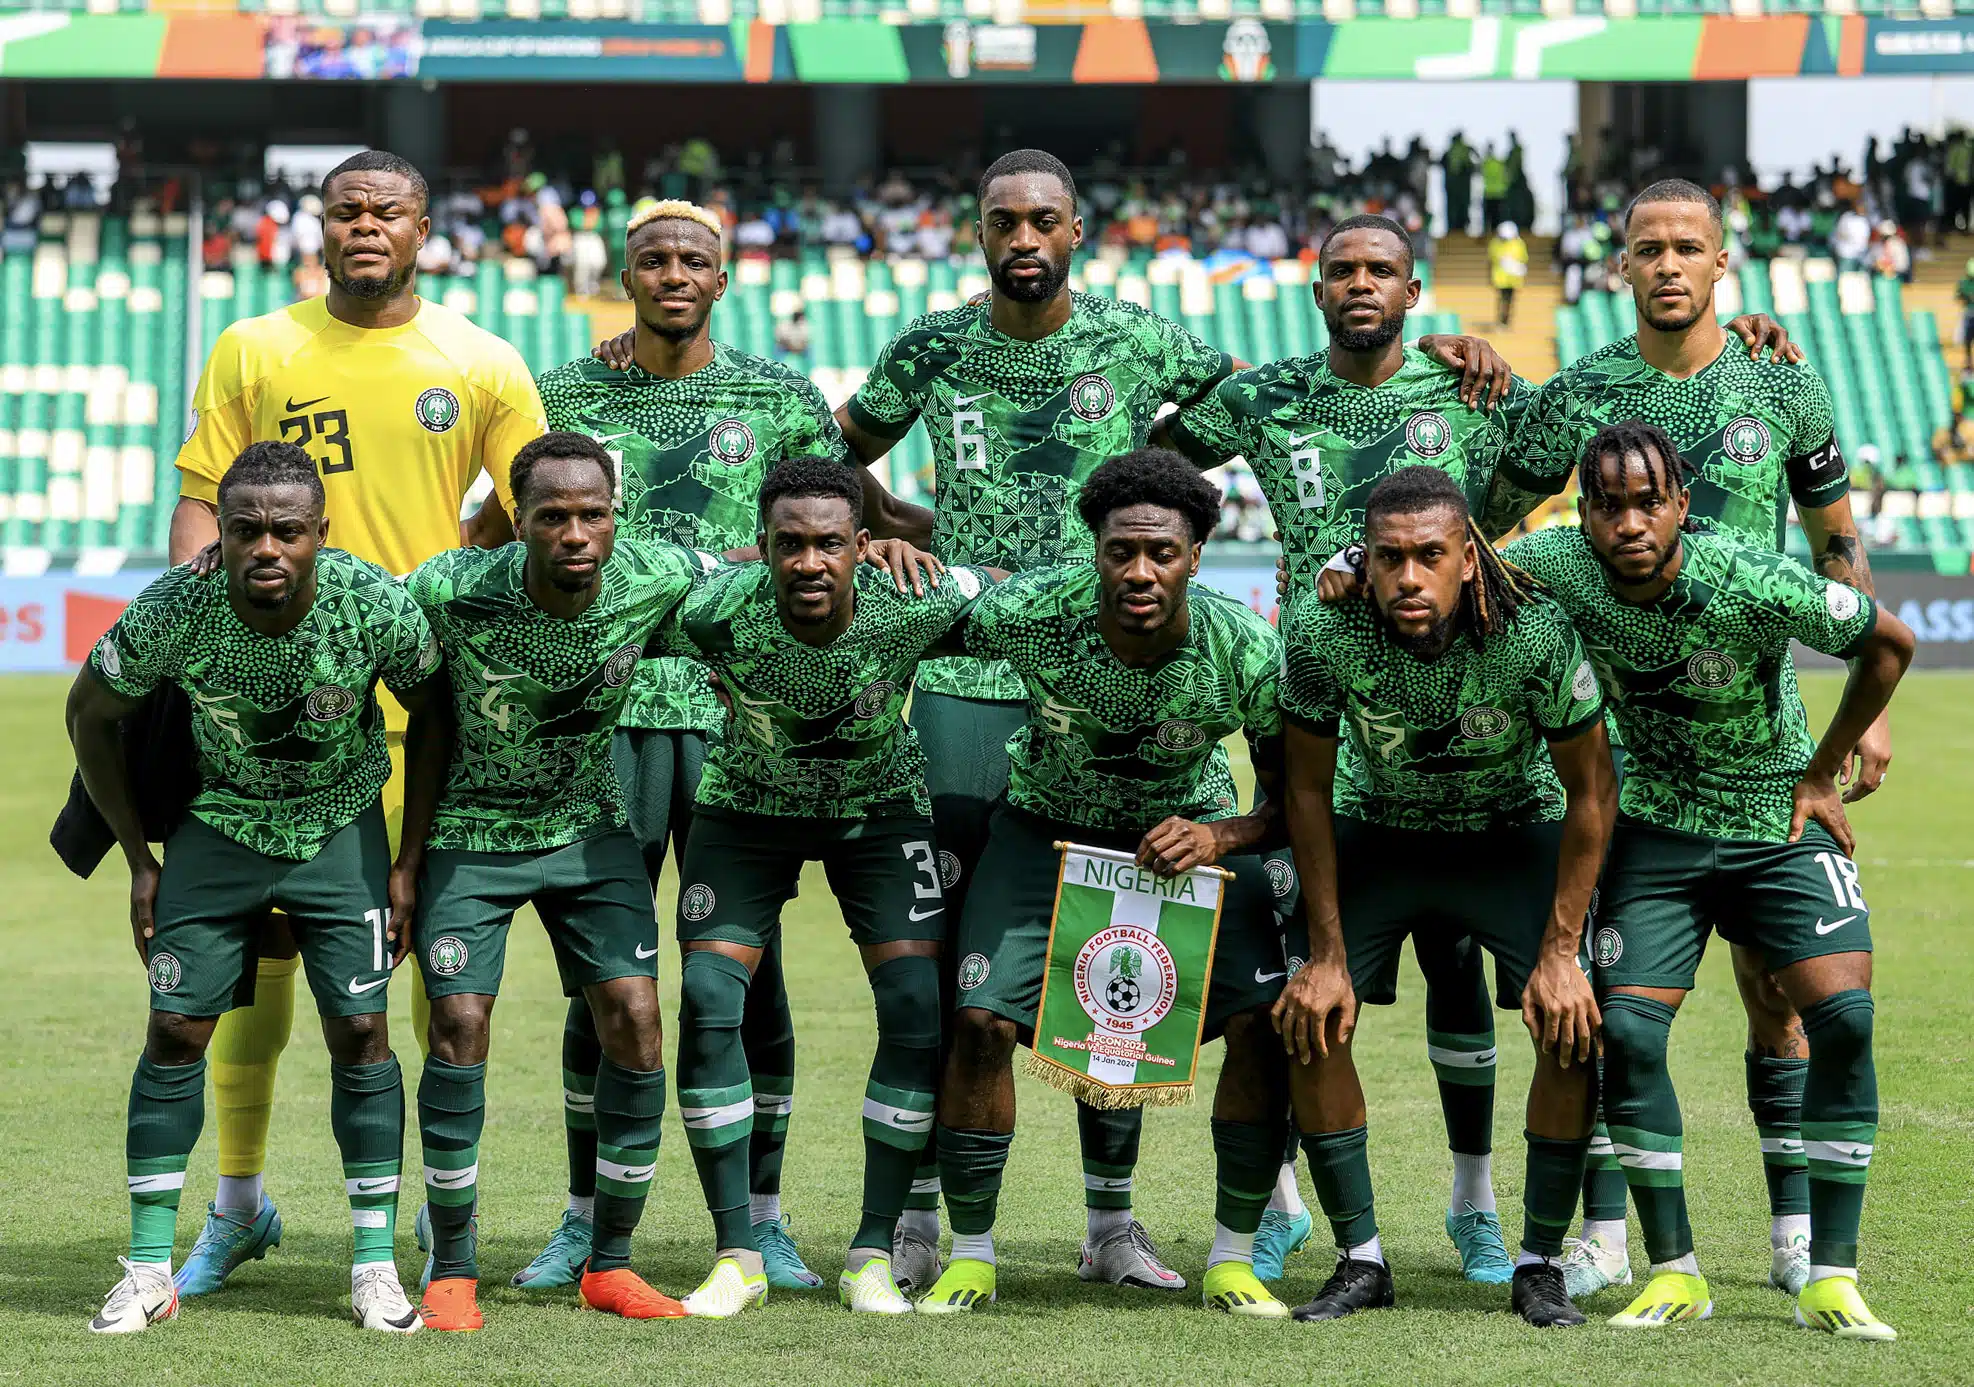 If the Super Eagles squad wins the AFCON 2023 tournament, they will receive $7 million.